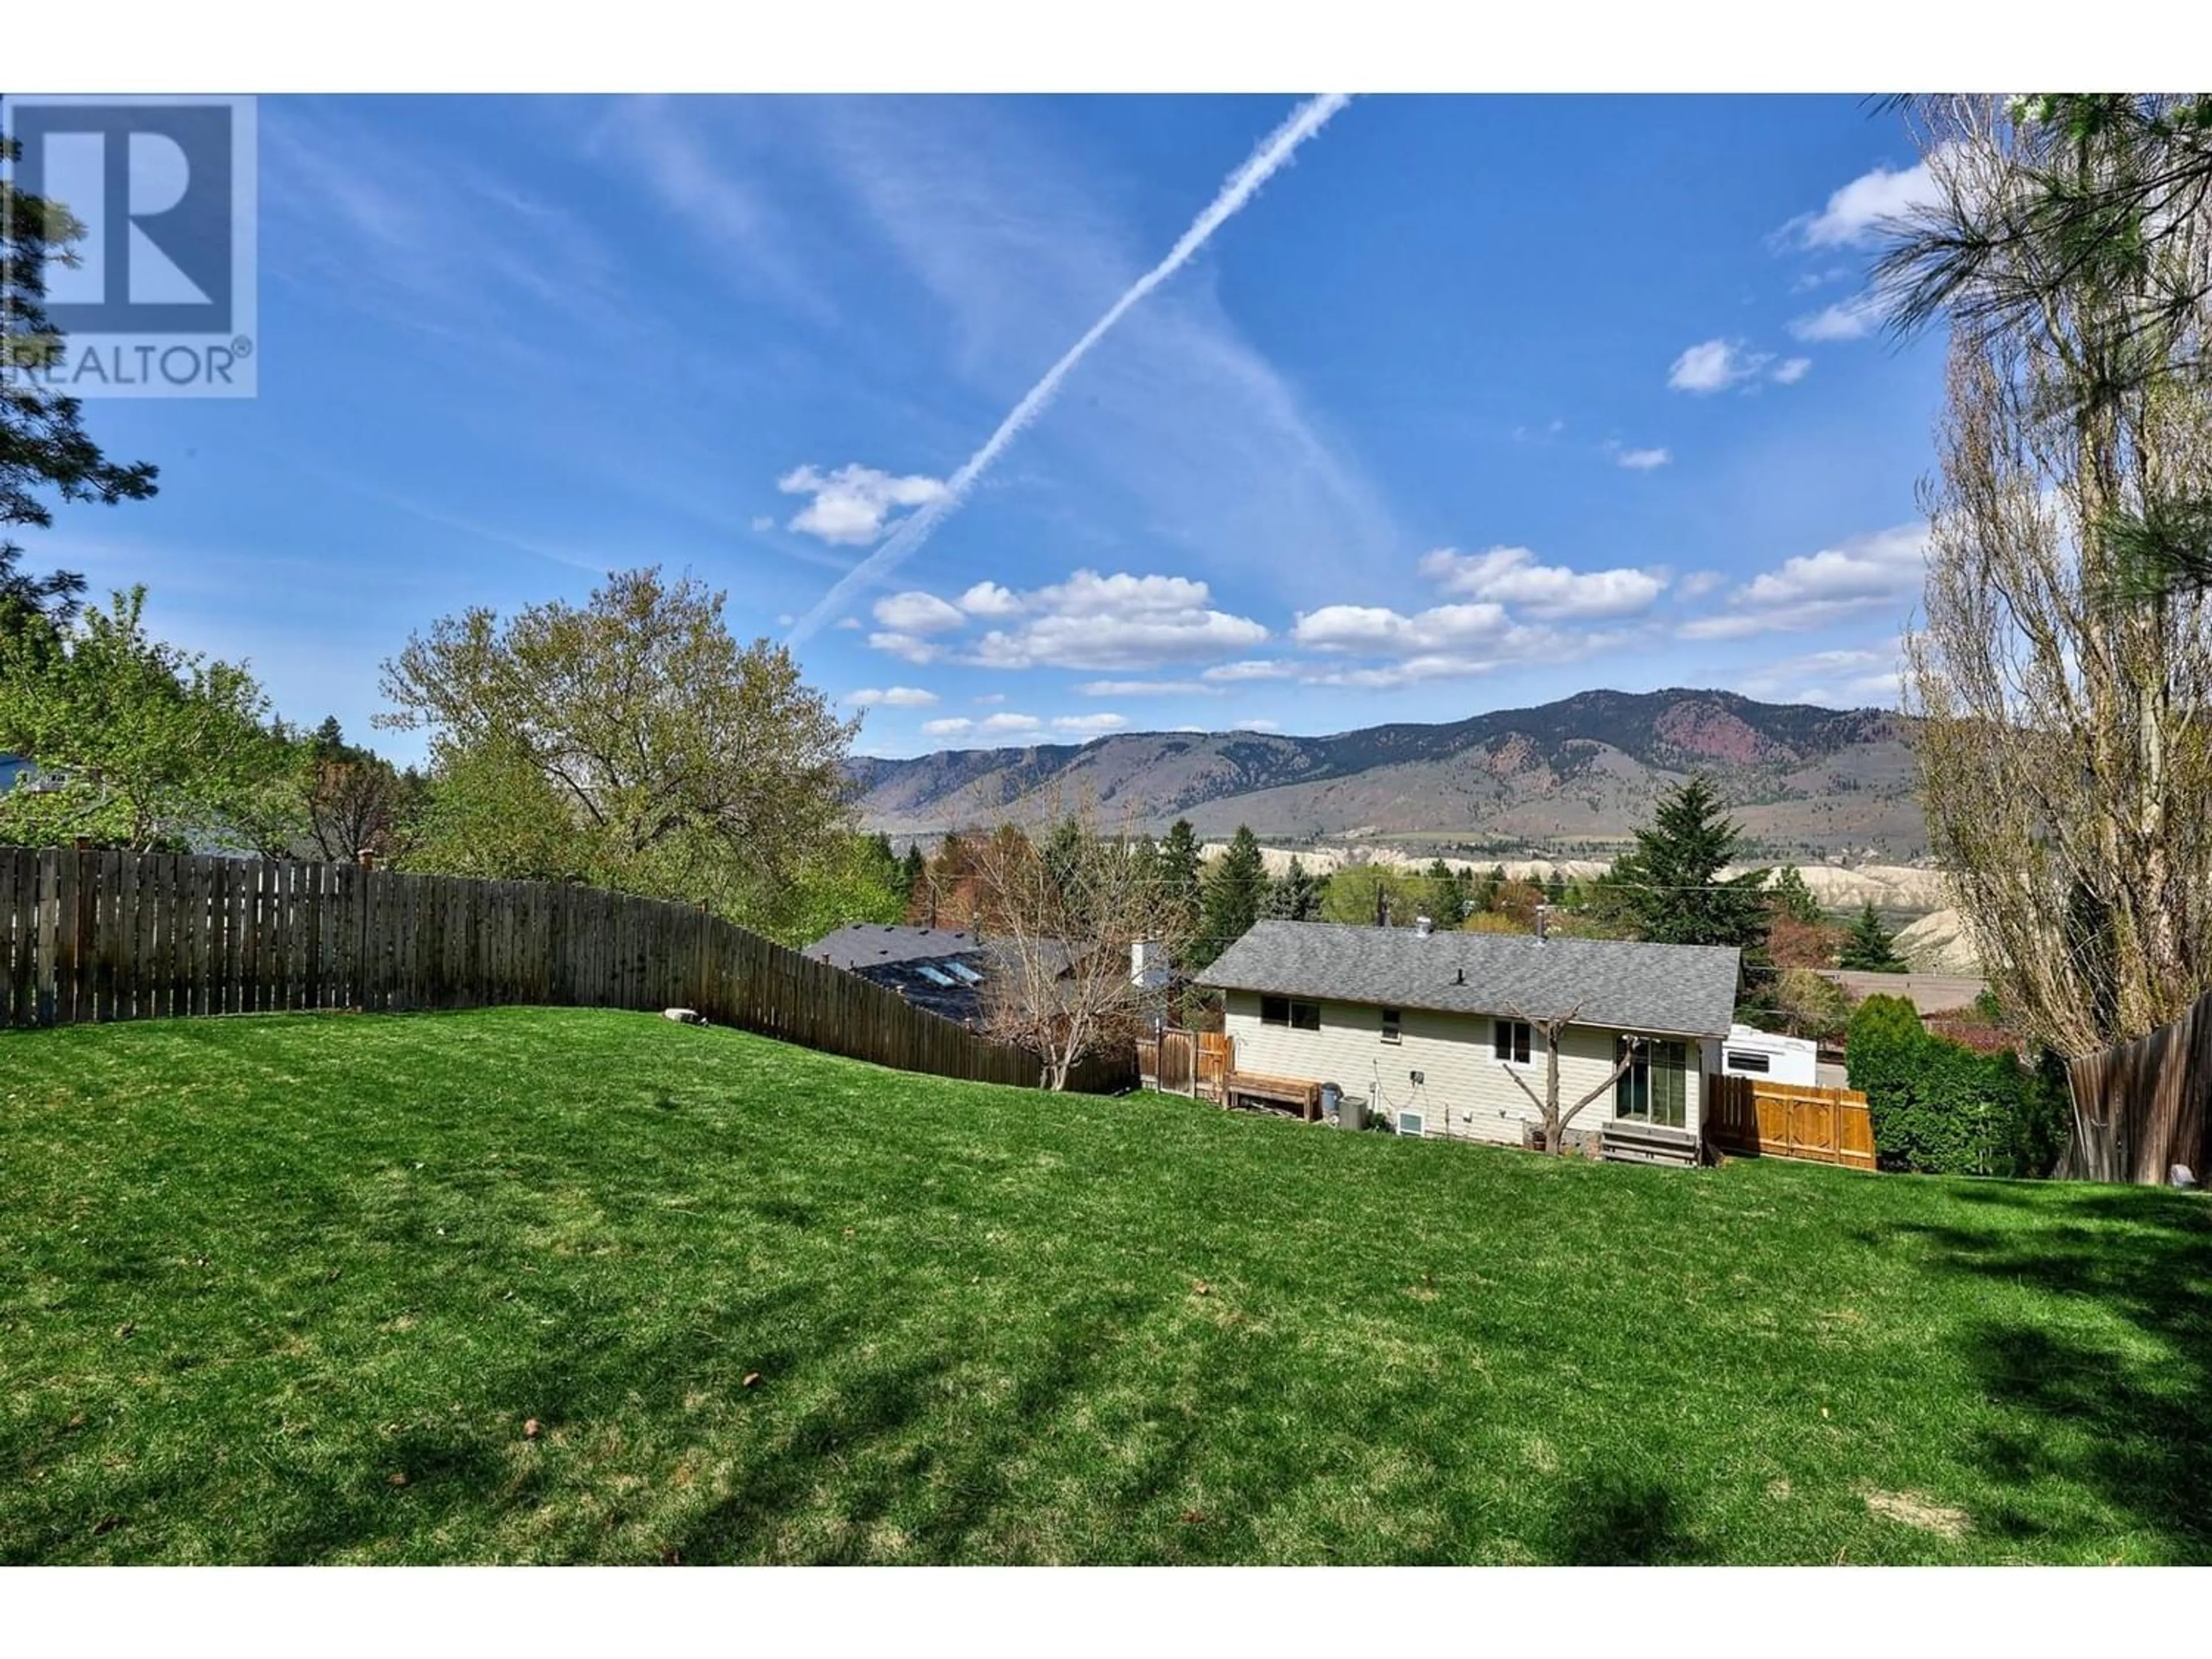 Fenced yard for 5405 MORRIS PLACE, Kamloops British Columbia V2C5S3